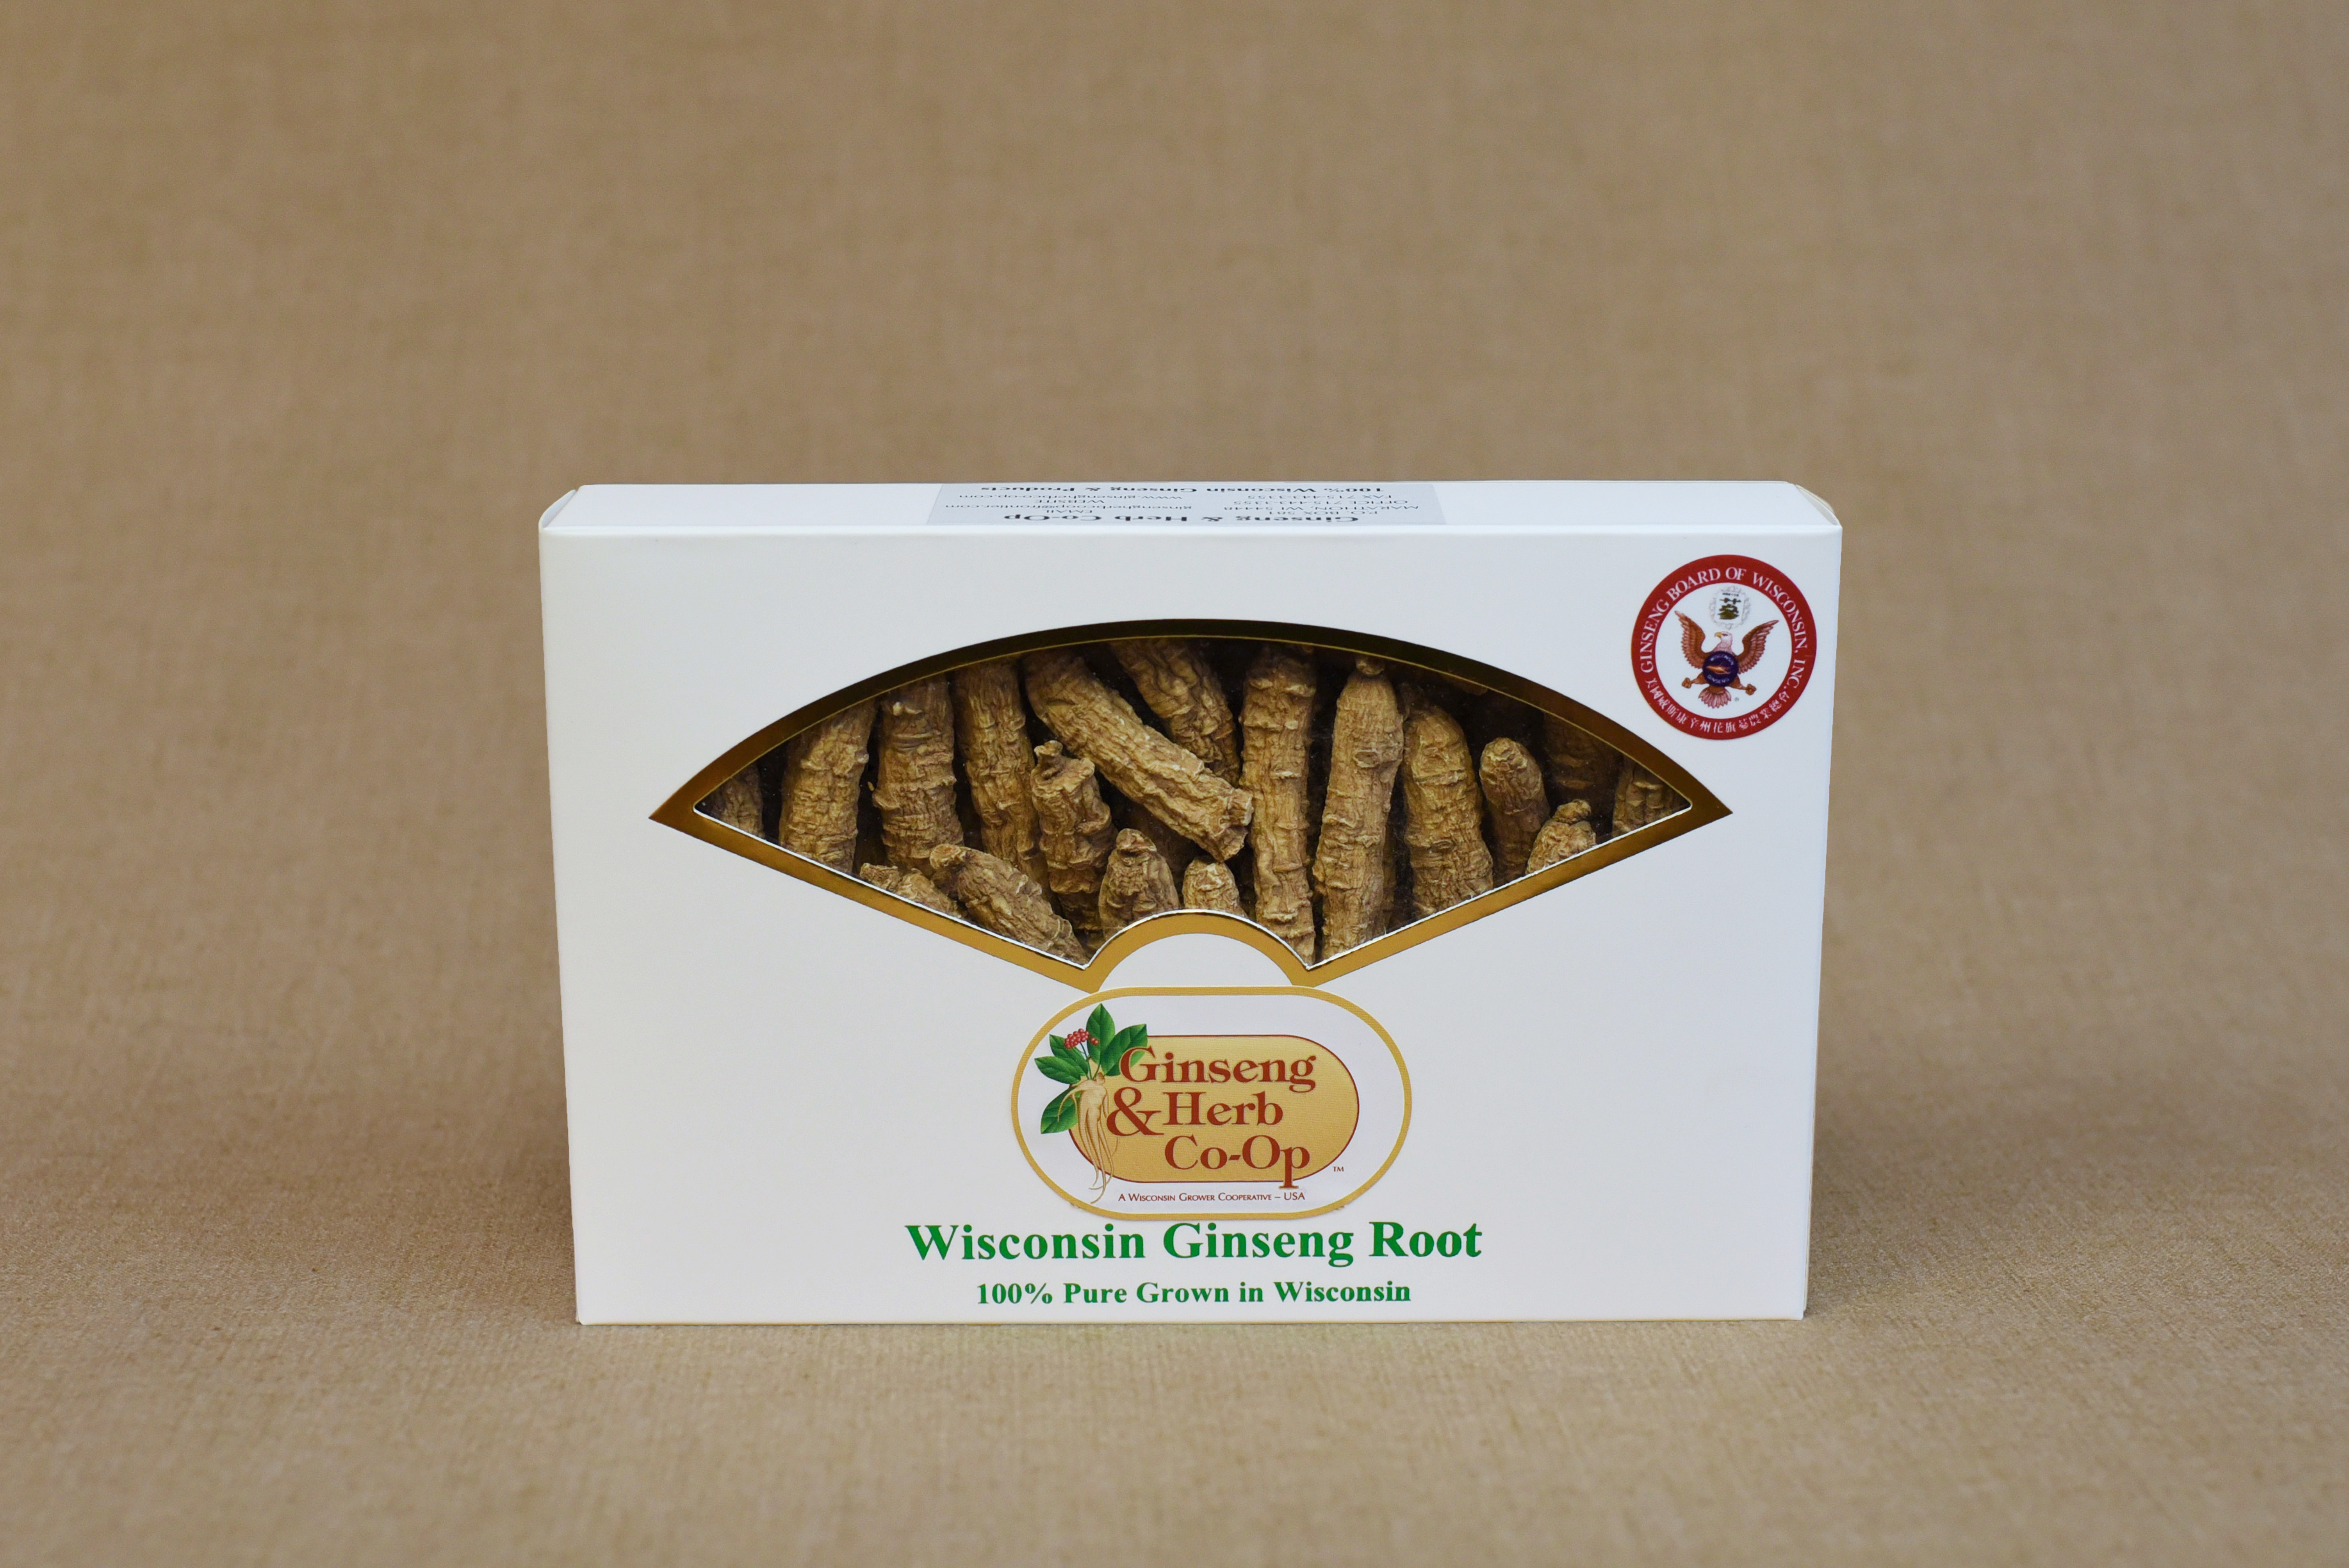 Buy Now! high quality Wisconsin Ginseng roots in La Crosse, WI